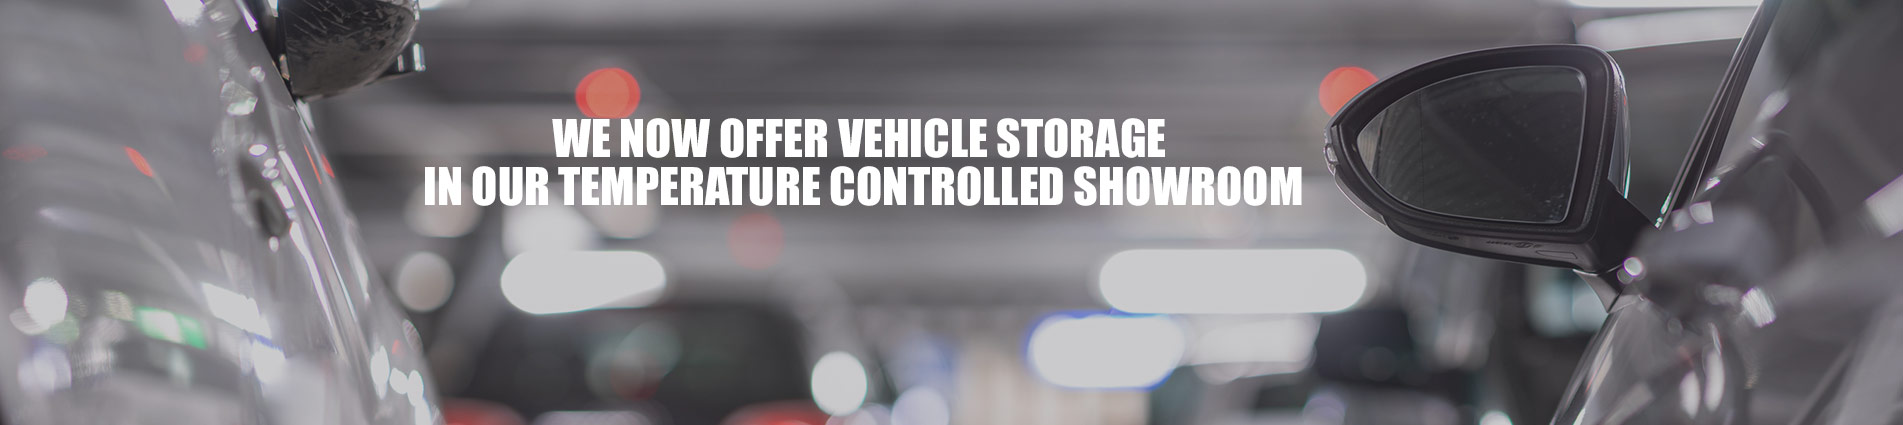 We now offer vehicle storage in our temperature controlled showroom